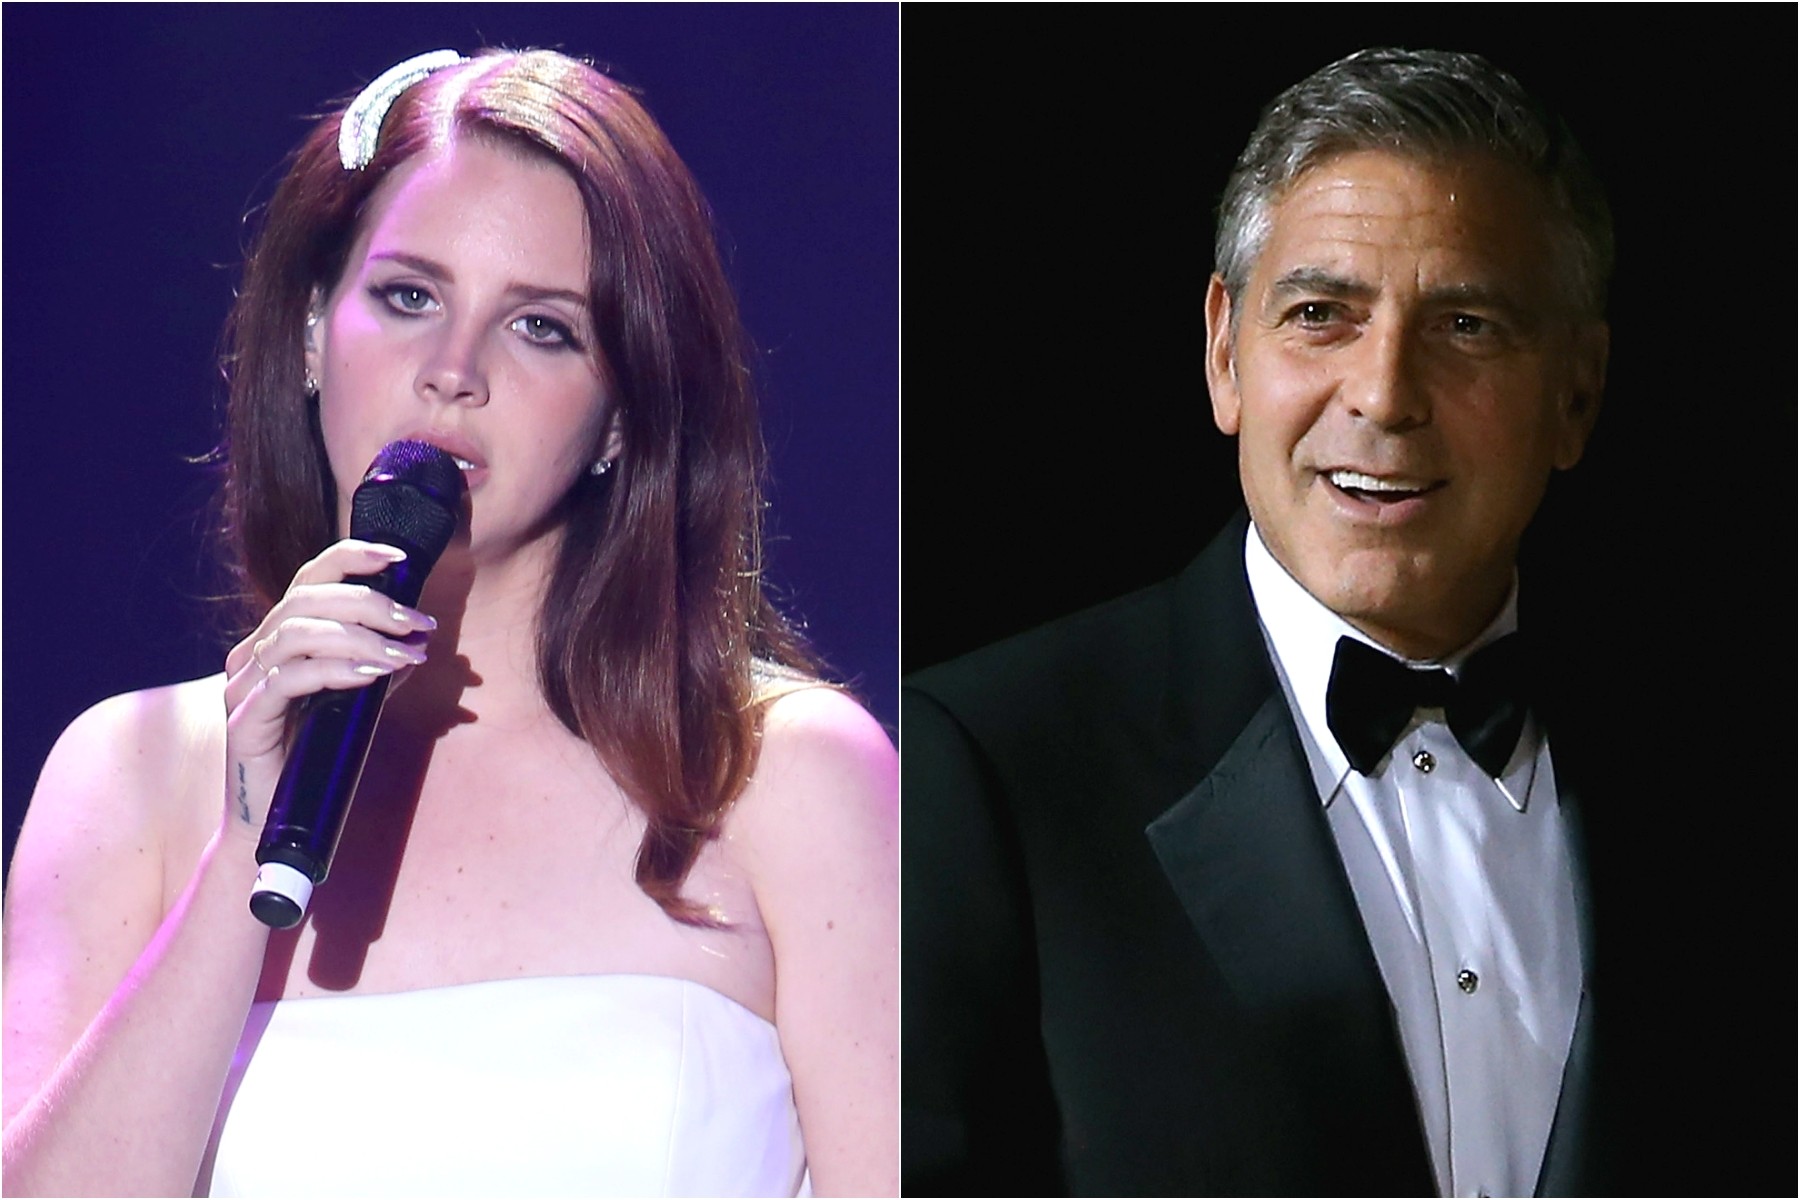 Lana Del Rey e George Clooney. (Foto: Getty Images)